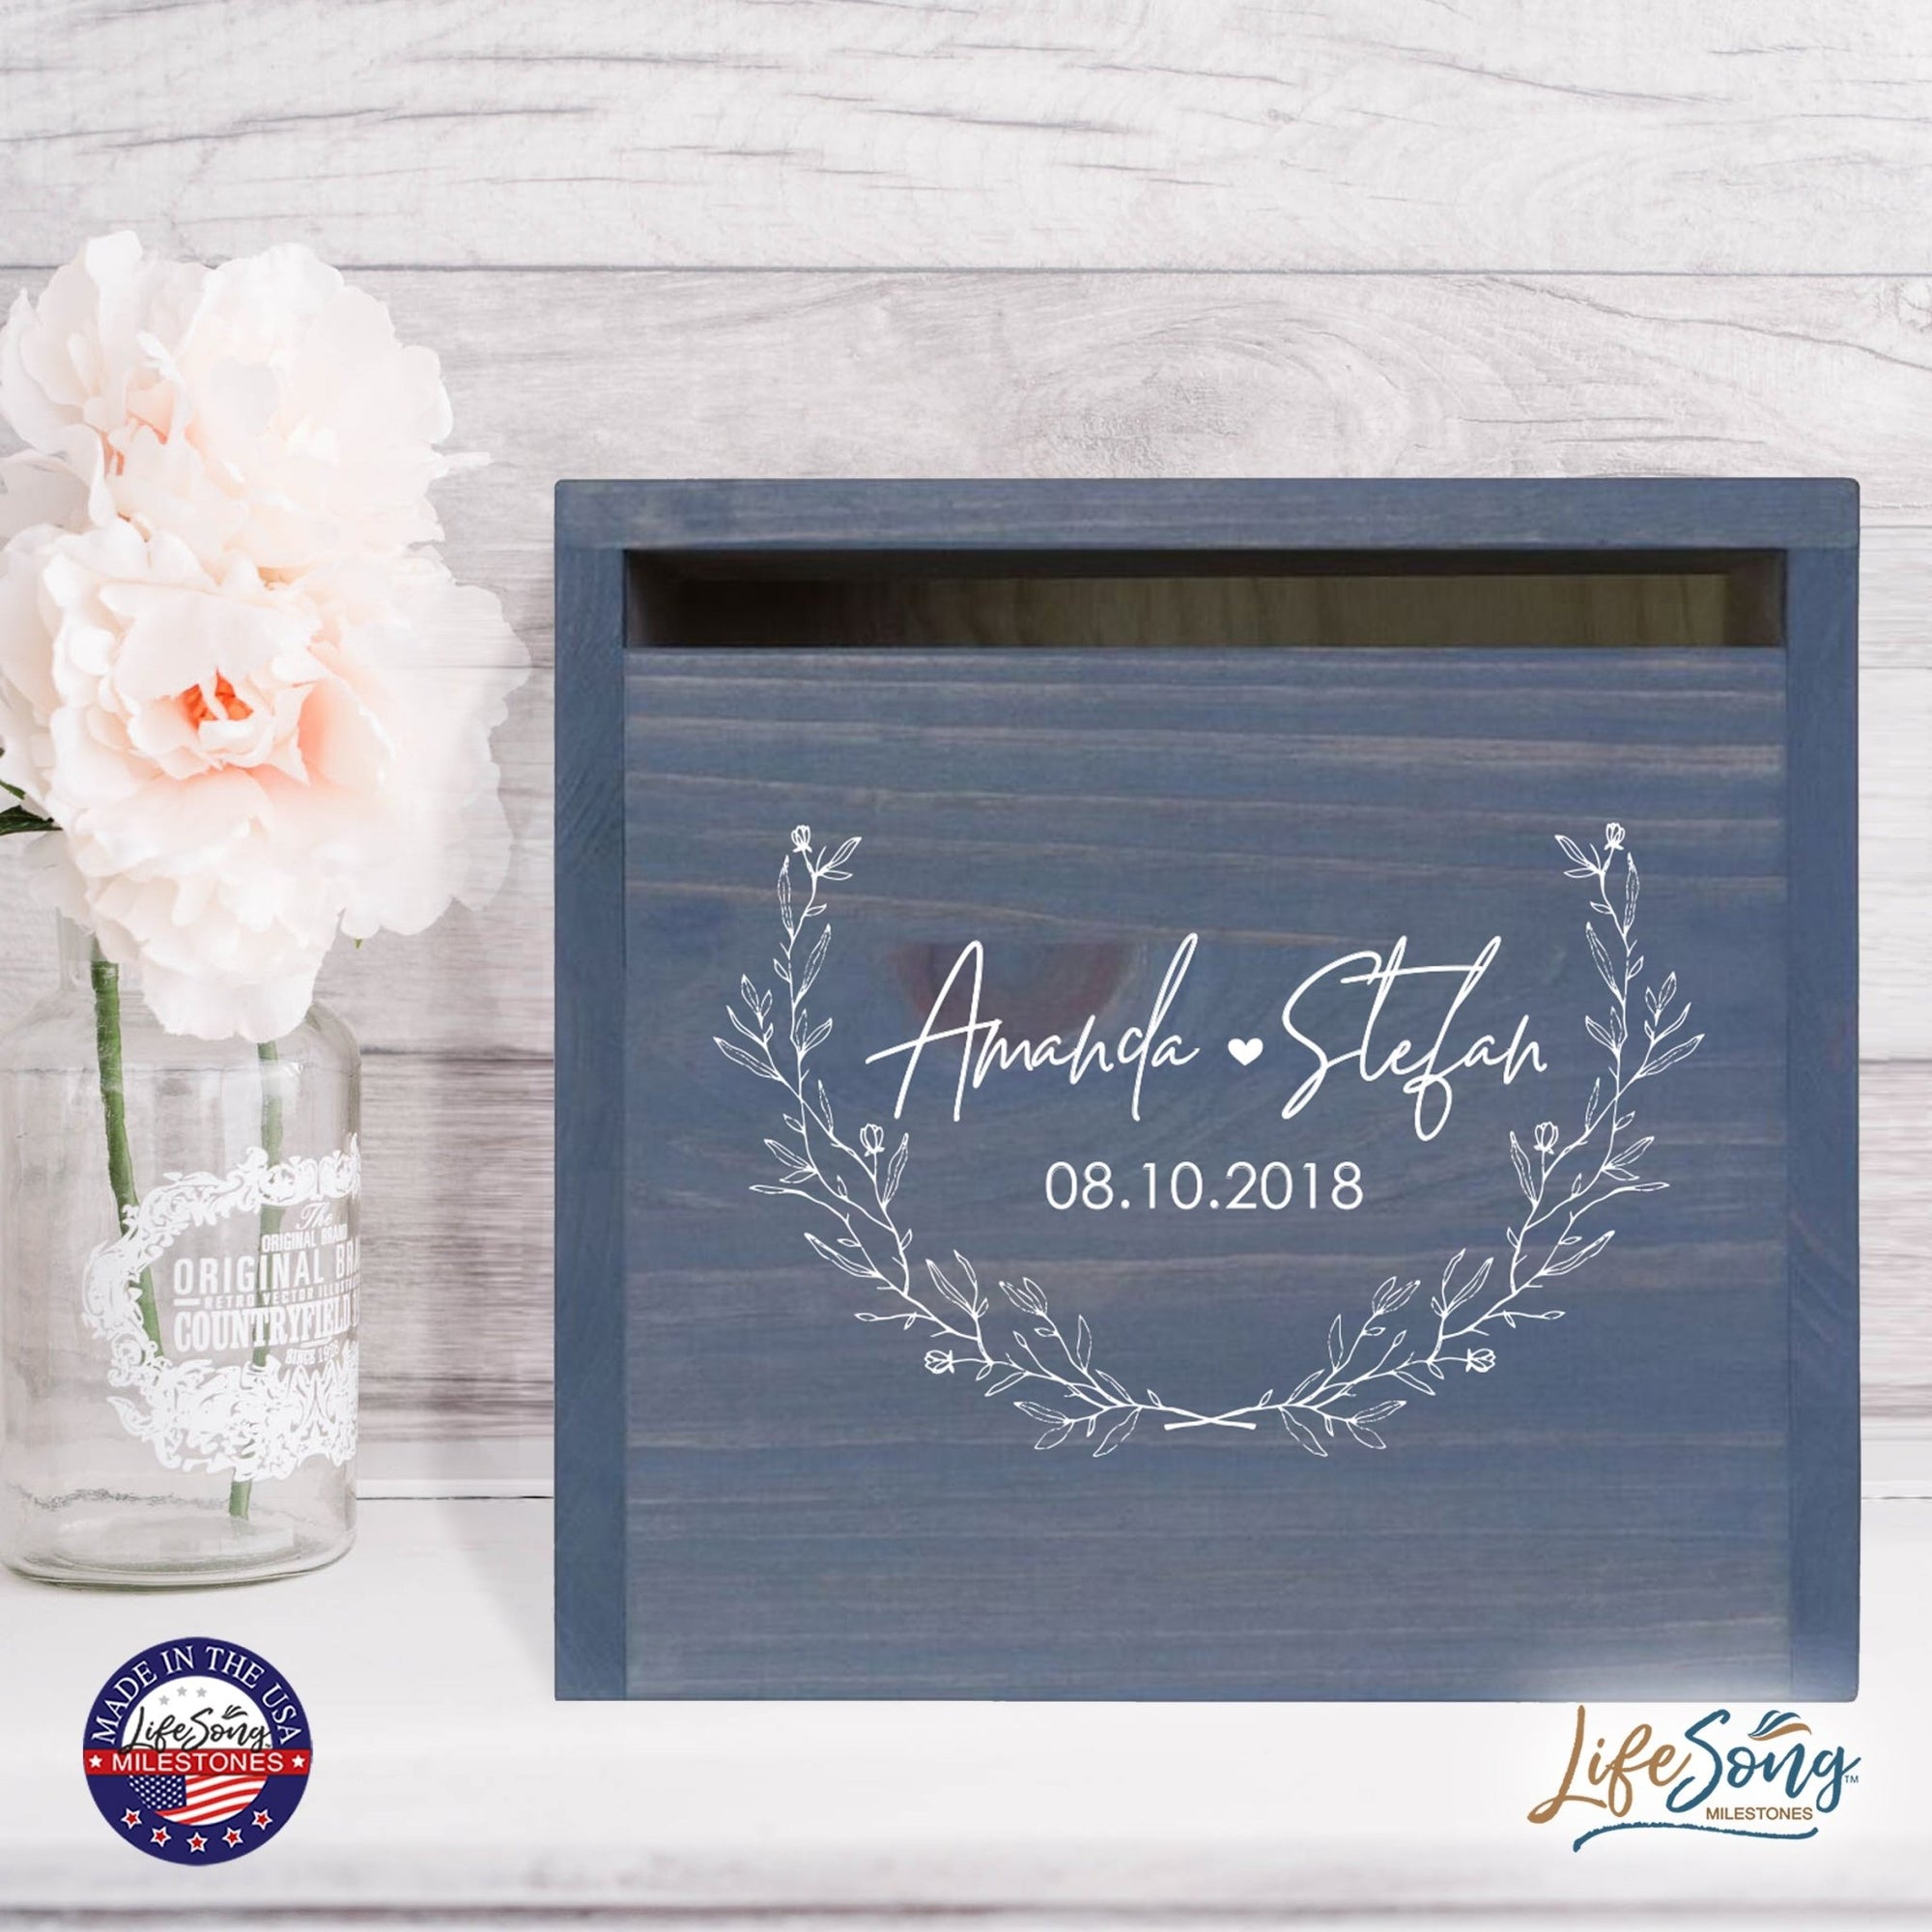 Personalized Wooden Card Box for Wedding Ceremonies, Venues, Receptions, Bridal Showers, and Engagement Parties 13.5x12 - Amanda & Stefan (Leaves) - LifeSong Milestones